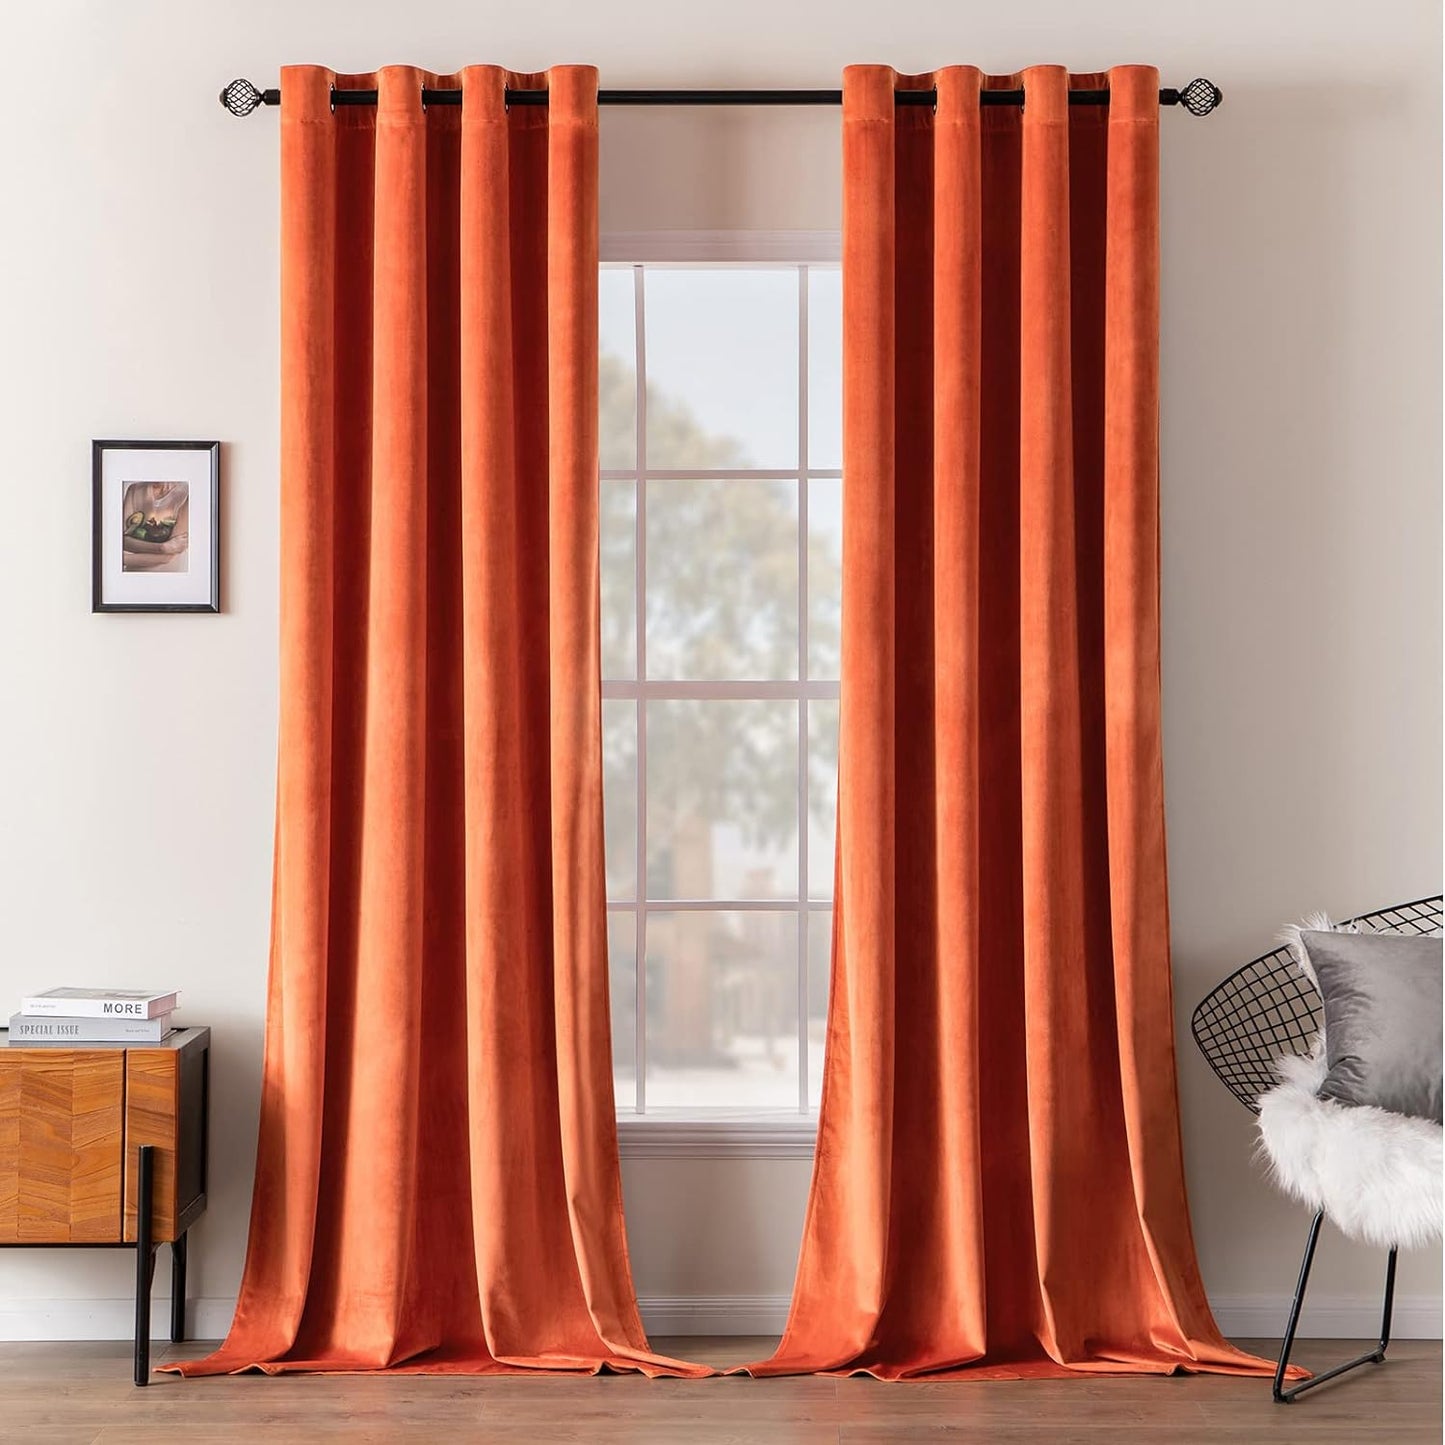 MIULEE Velvet Curtains Olive Green Elegant Grommet Curtains Thermal Insulated Soundproof Room Darkening Curtains/Drapes for Classical Living Room Bedroom Decor 52 X 84 Inch Set of 2  MIULEE Burnt Orange W52 X L108 